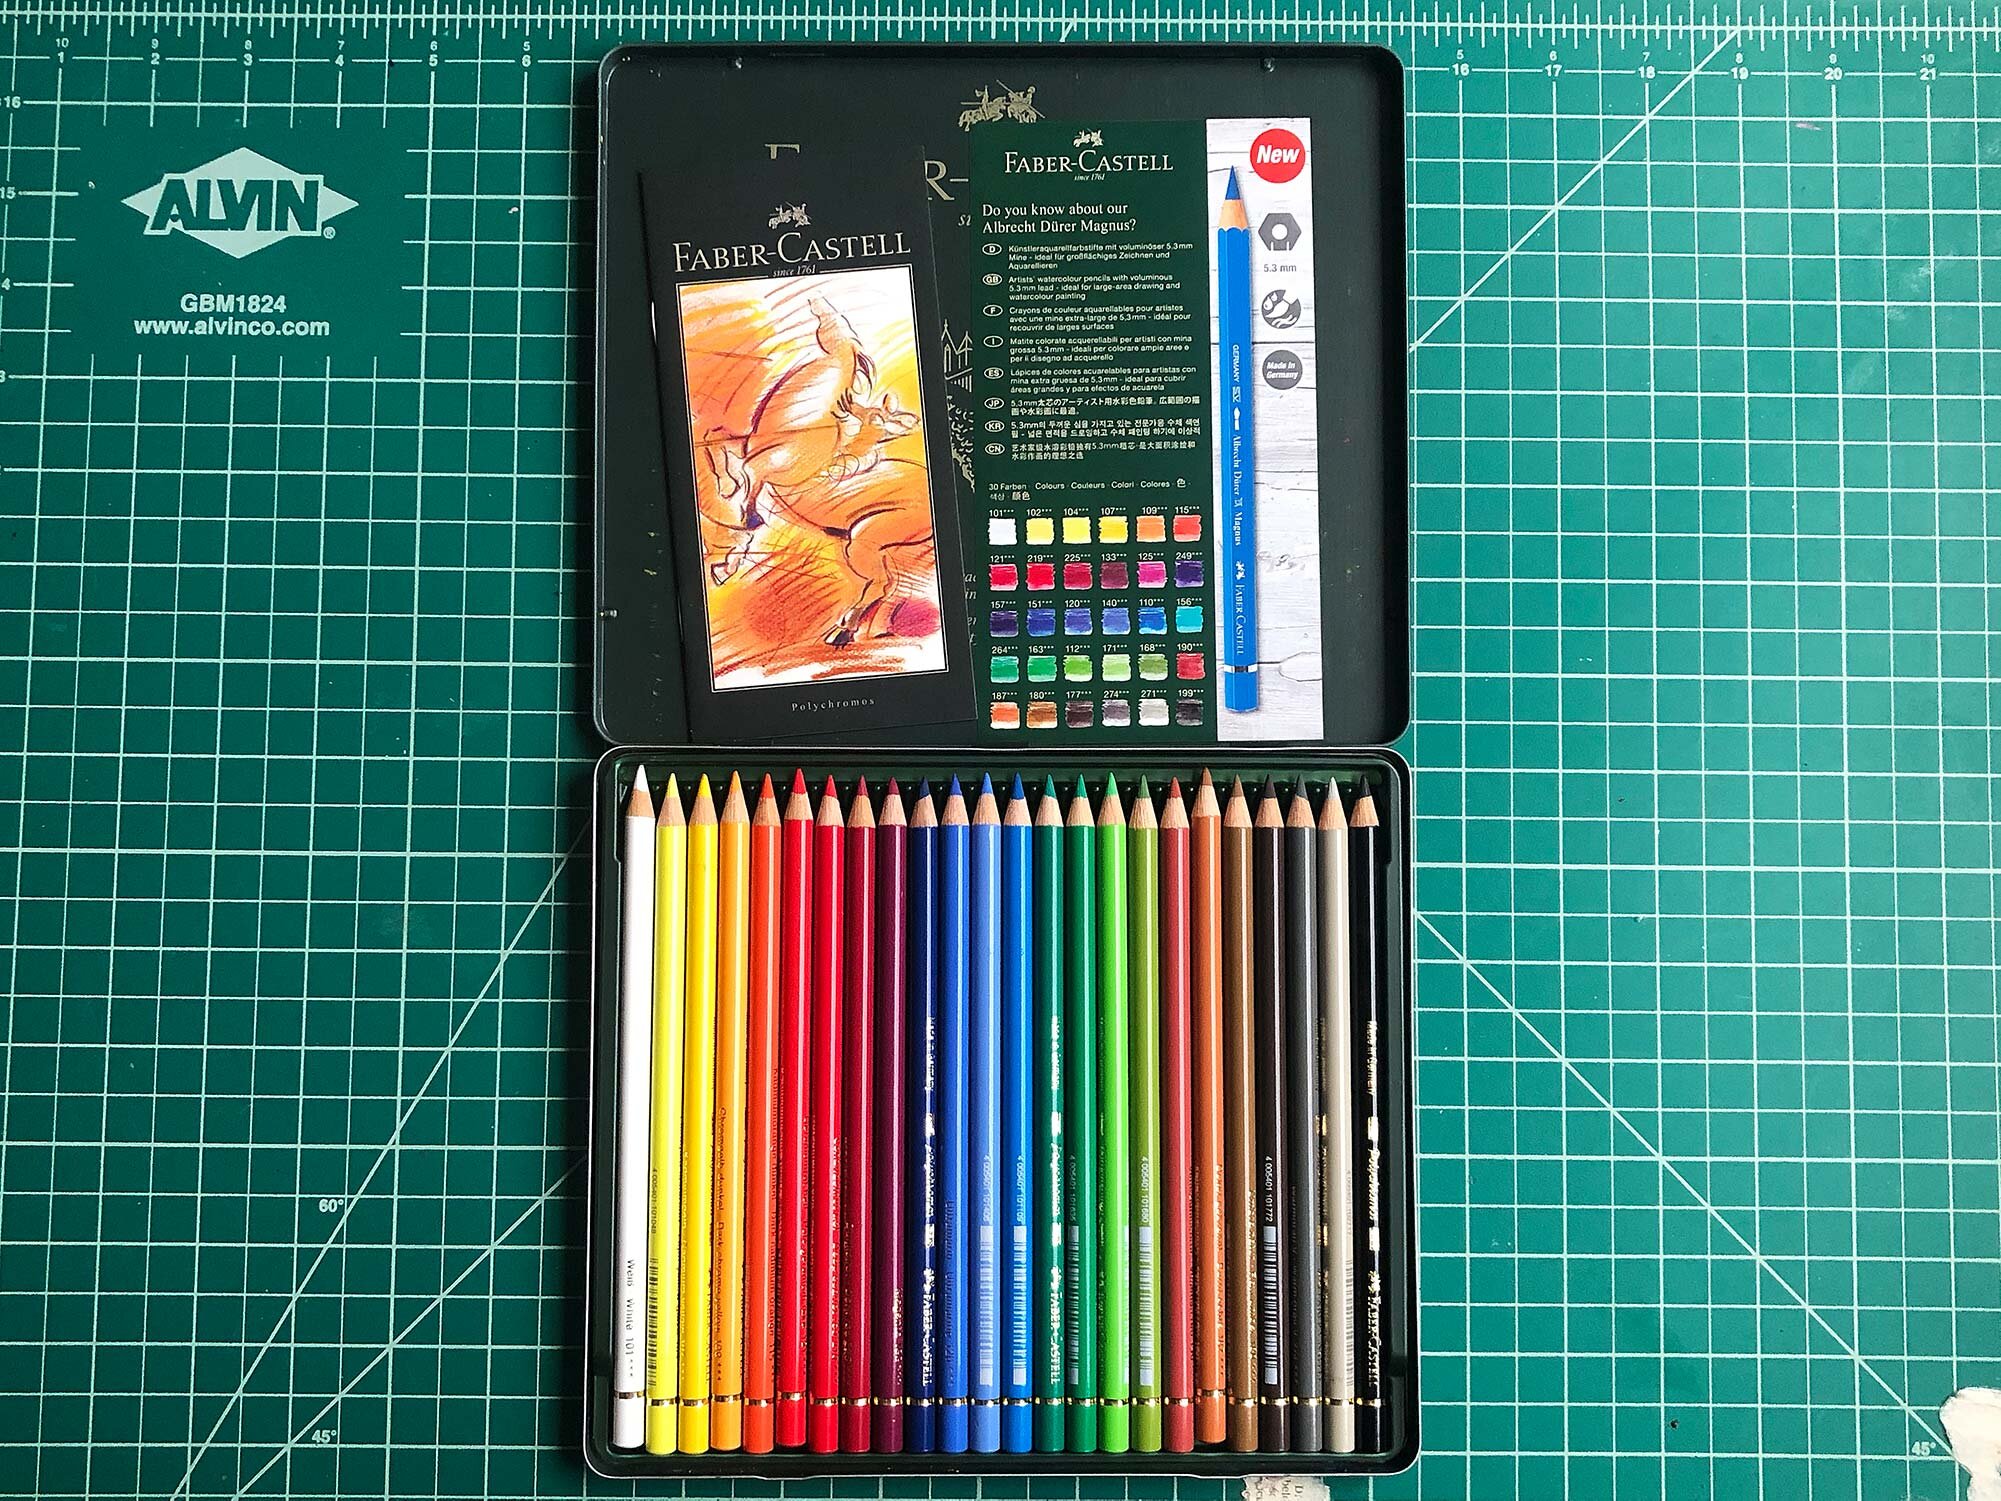 Faber-Castell Polychromos Artist Colored Pencils Set - Premium Quality Polychromos Colored Pencils 120 Tin Gift Set Includes Pencil Sharpener